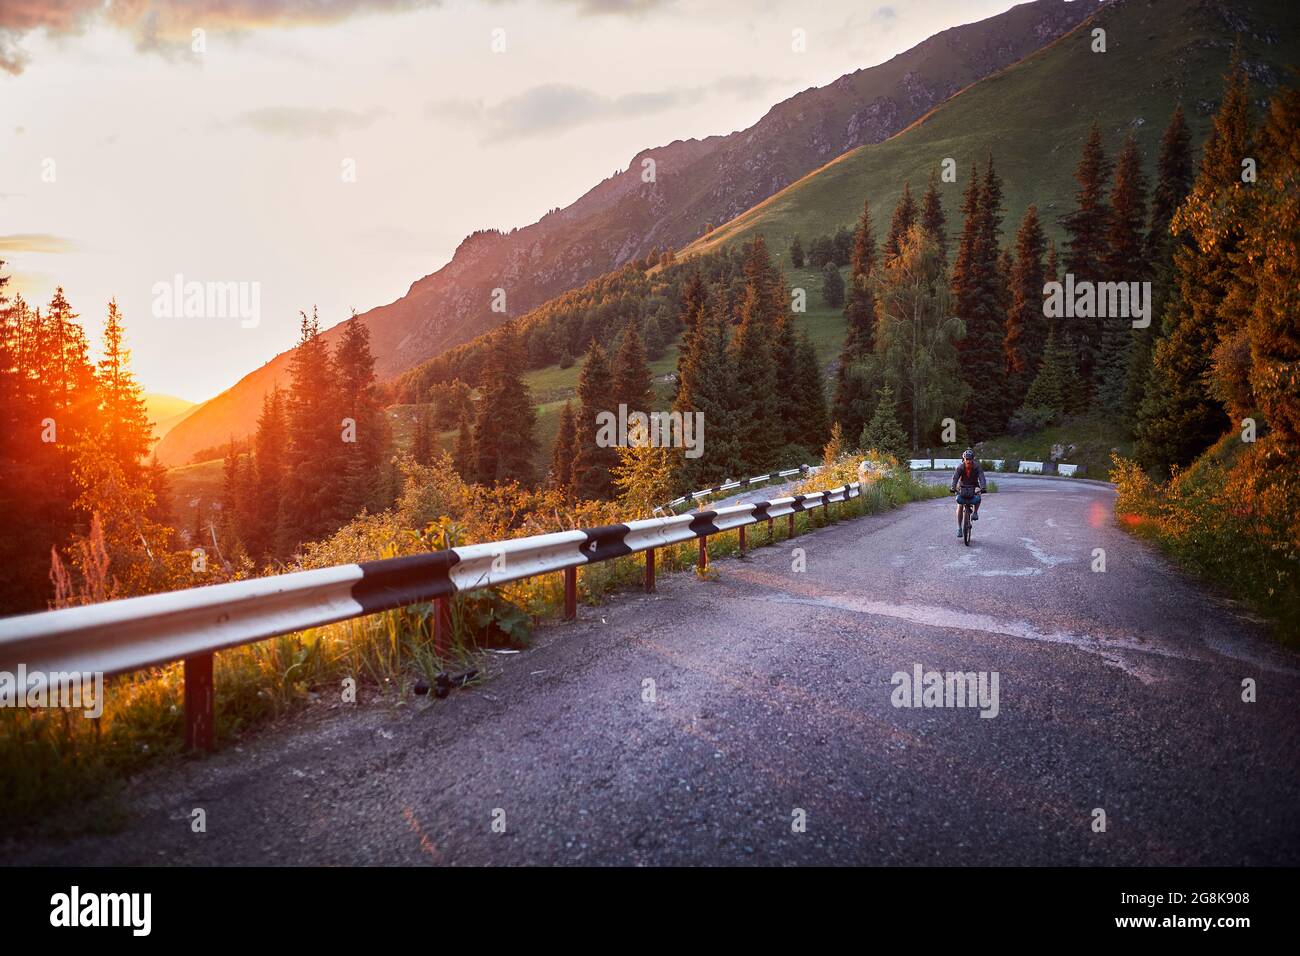 Man riding bicycle on the mountain road at purple sunset sky Stock Photo